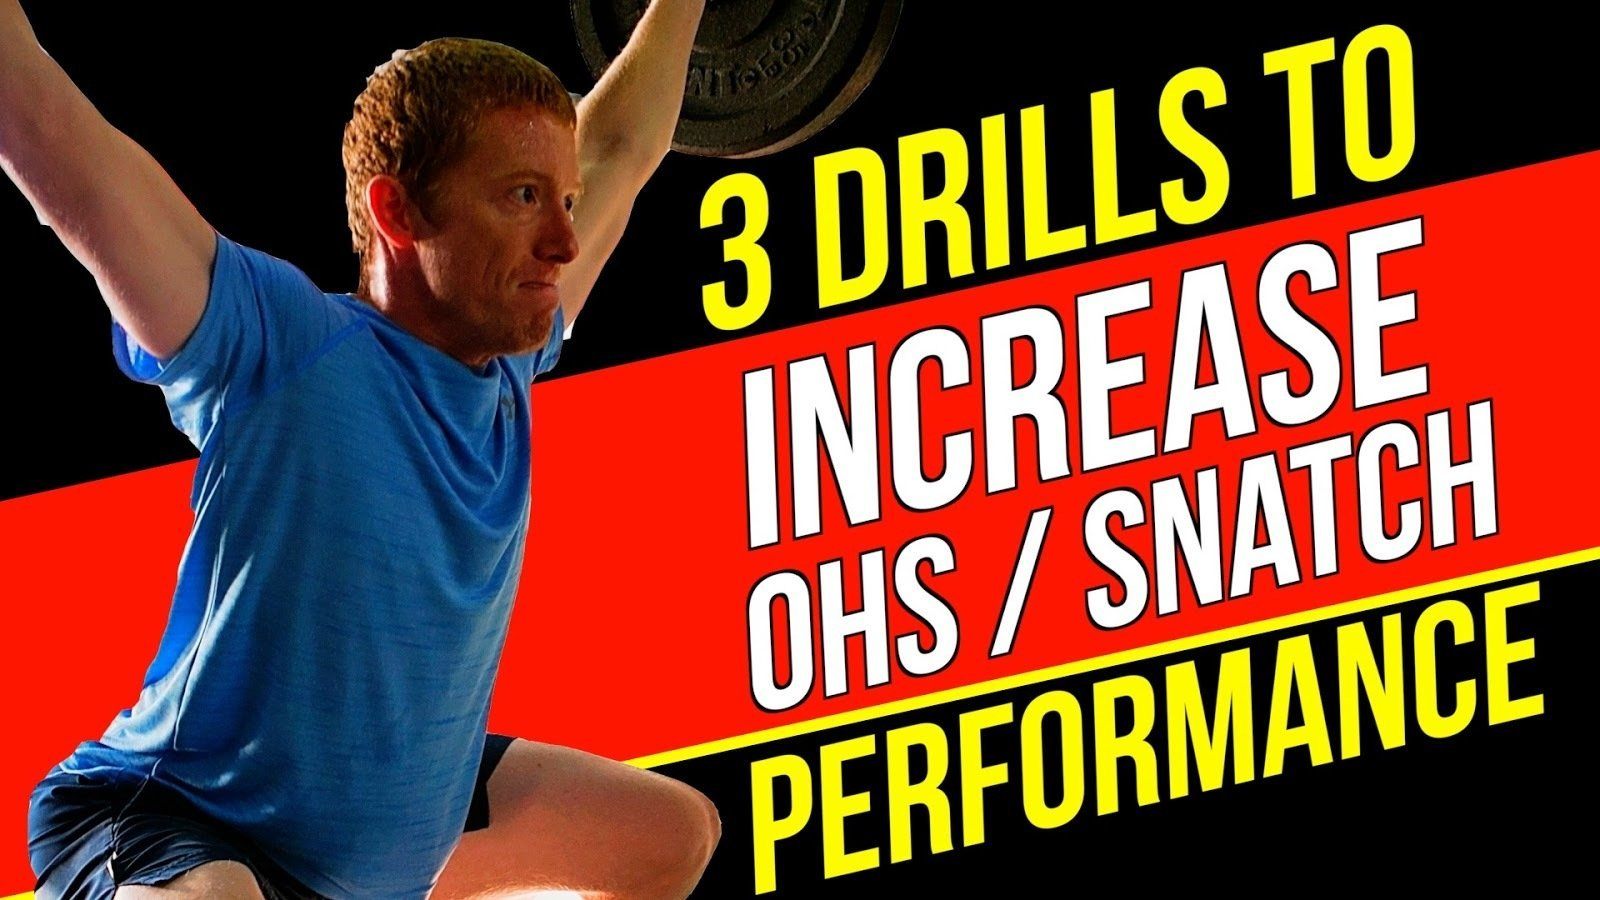 shoulder mobility drills for snatch and OHS